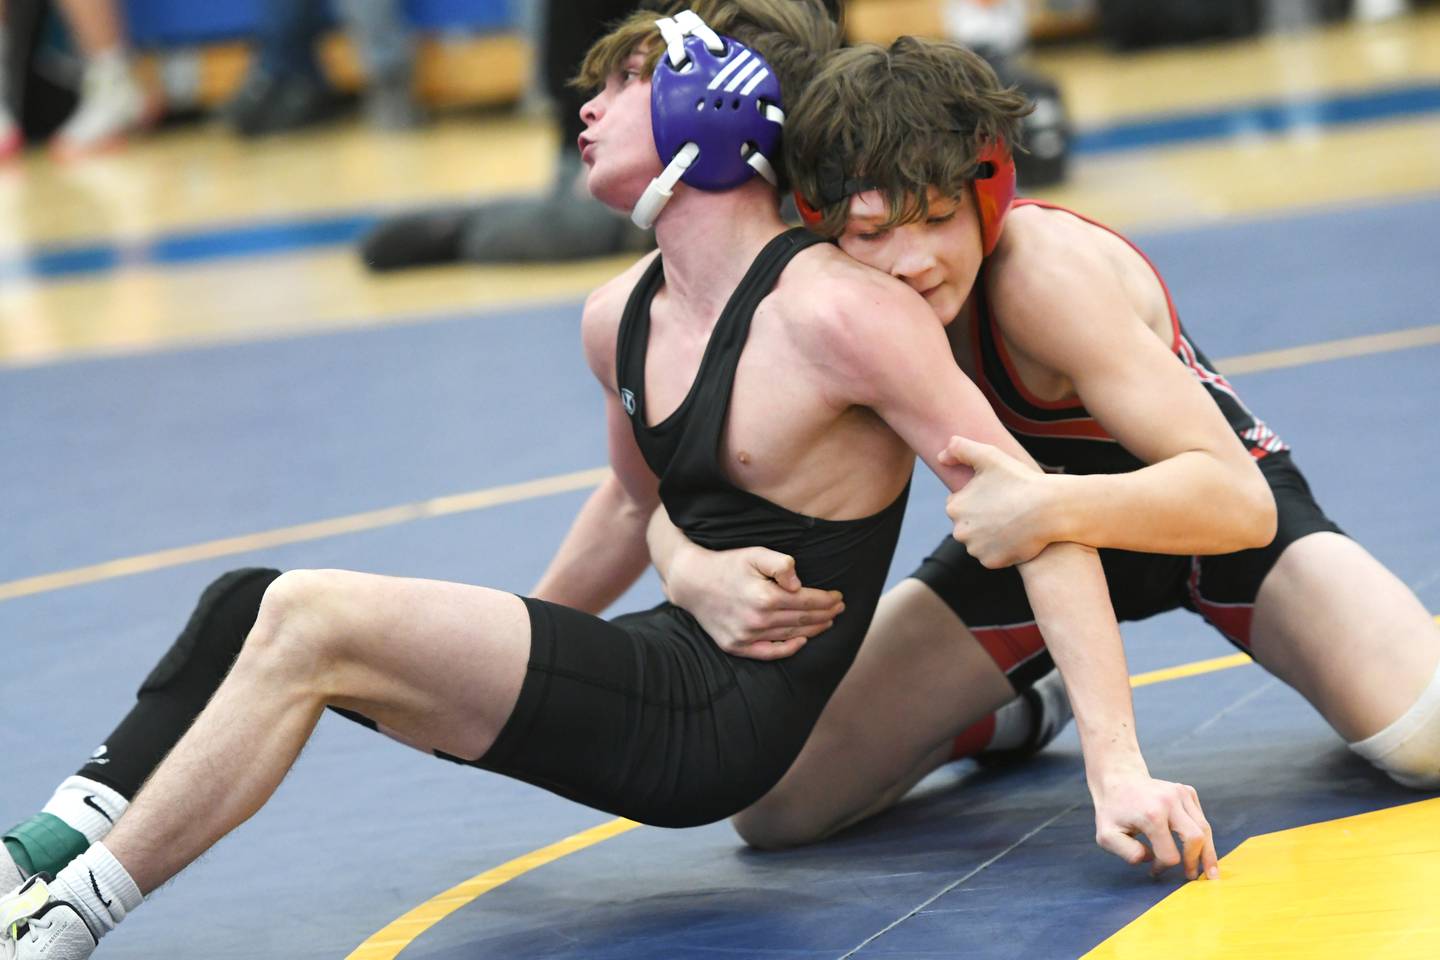 Amboy's Landon Blanton (right) wrestles Dixon's Ayden Rowley for the 113-pound championship at the 1A Polo Wrestling Regional held at Eastland High School in Lanark on Saturday, Feb. 4.